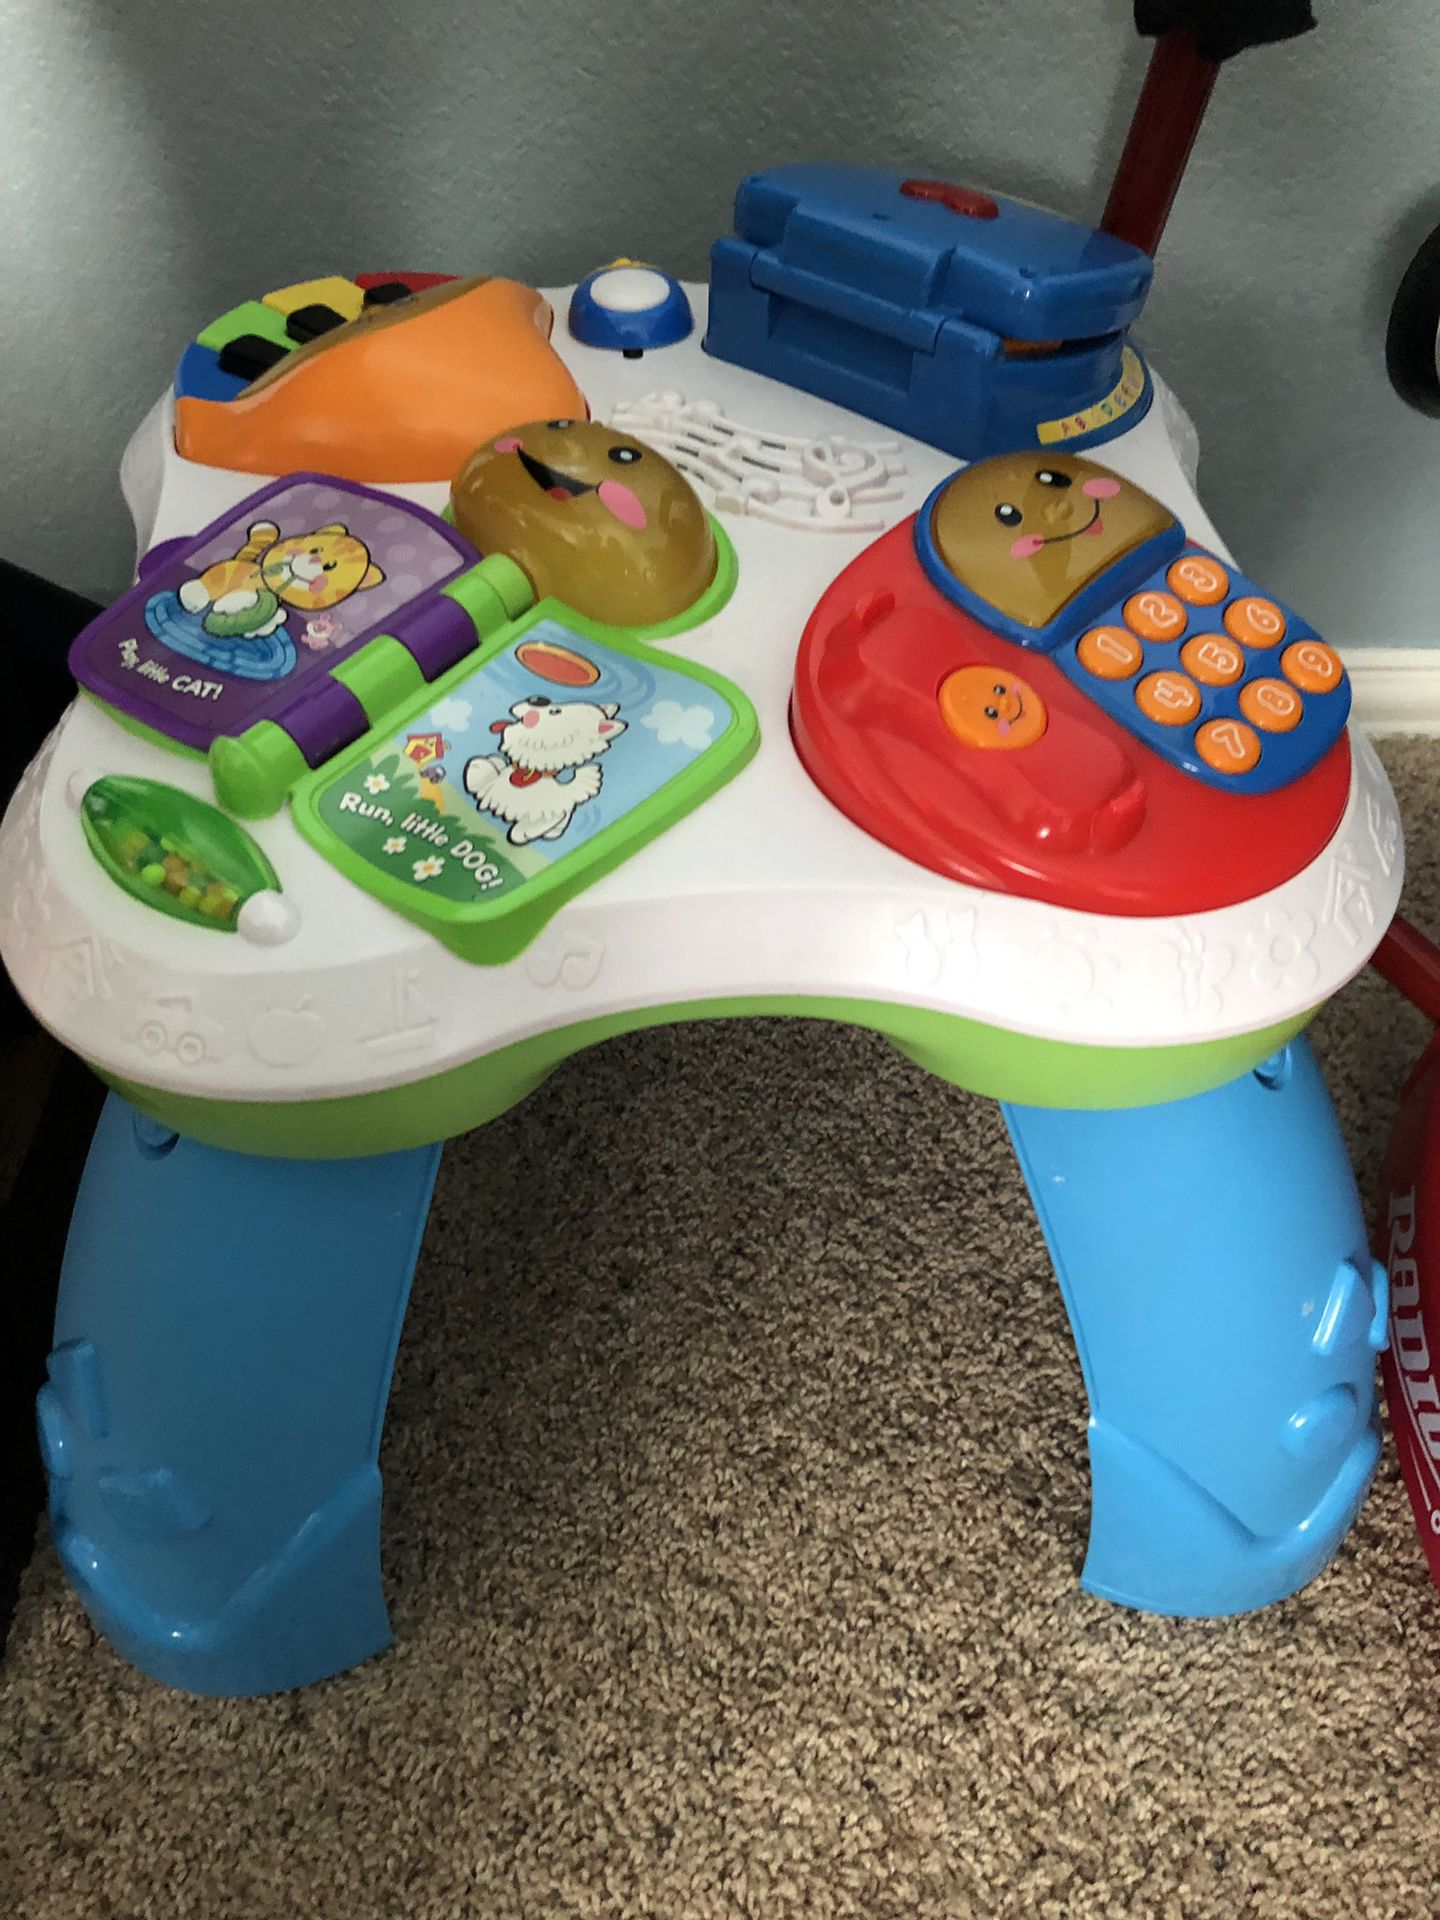 Kids stand and play toy